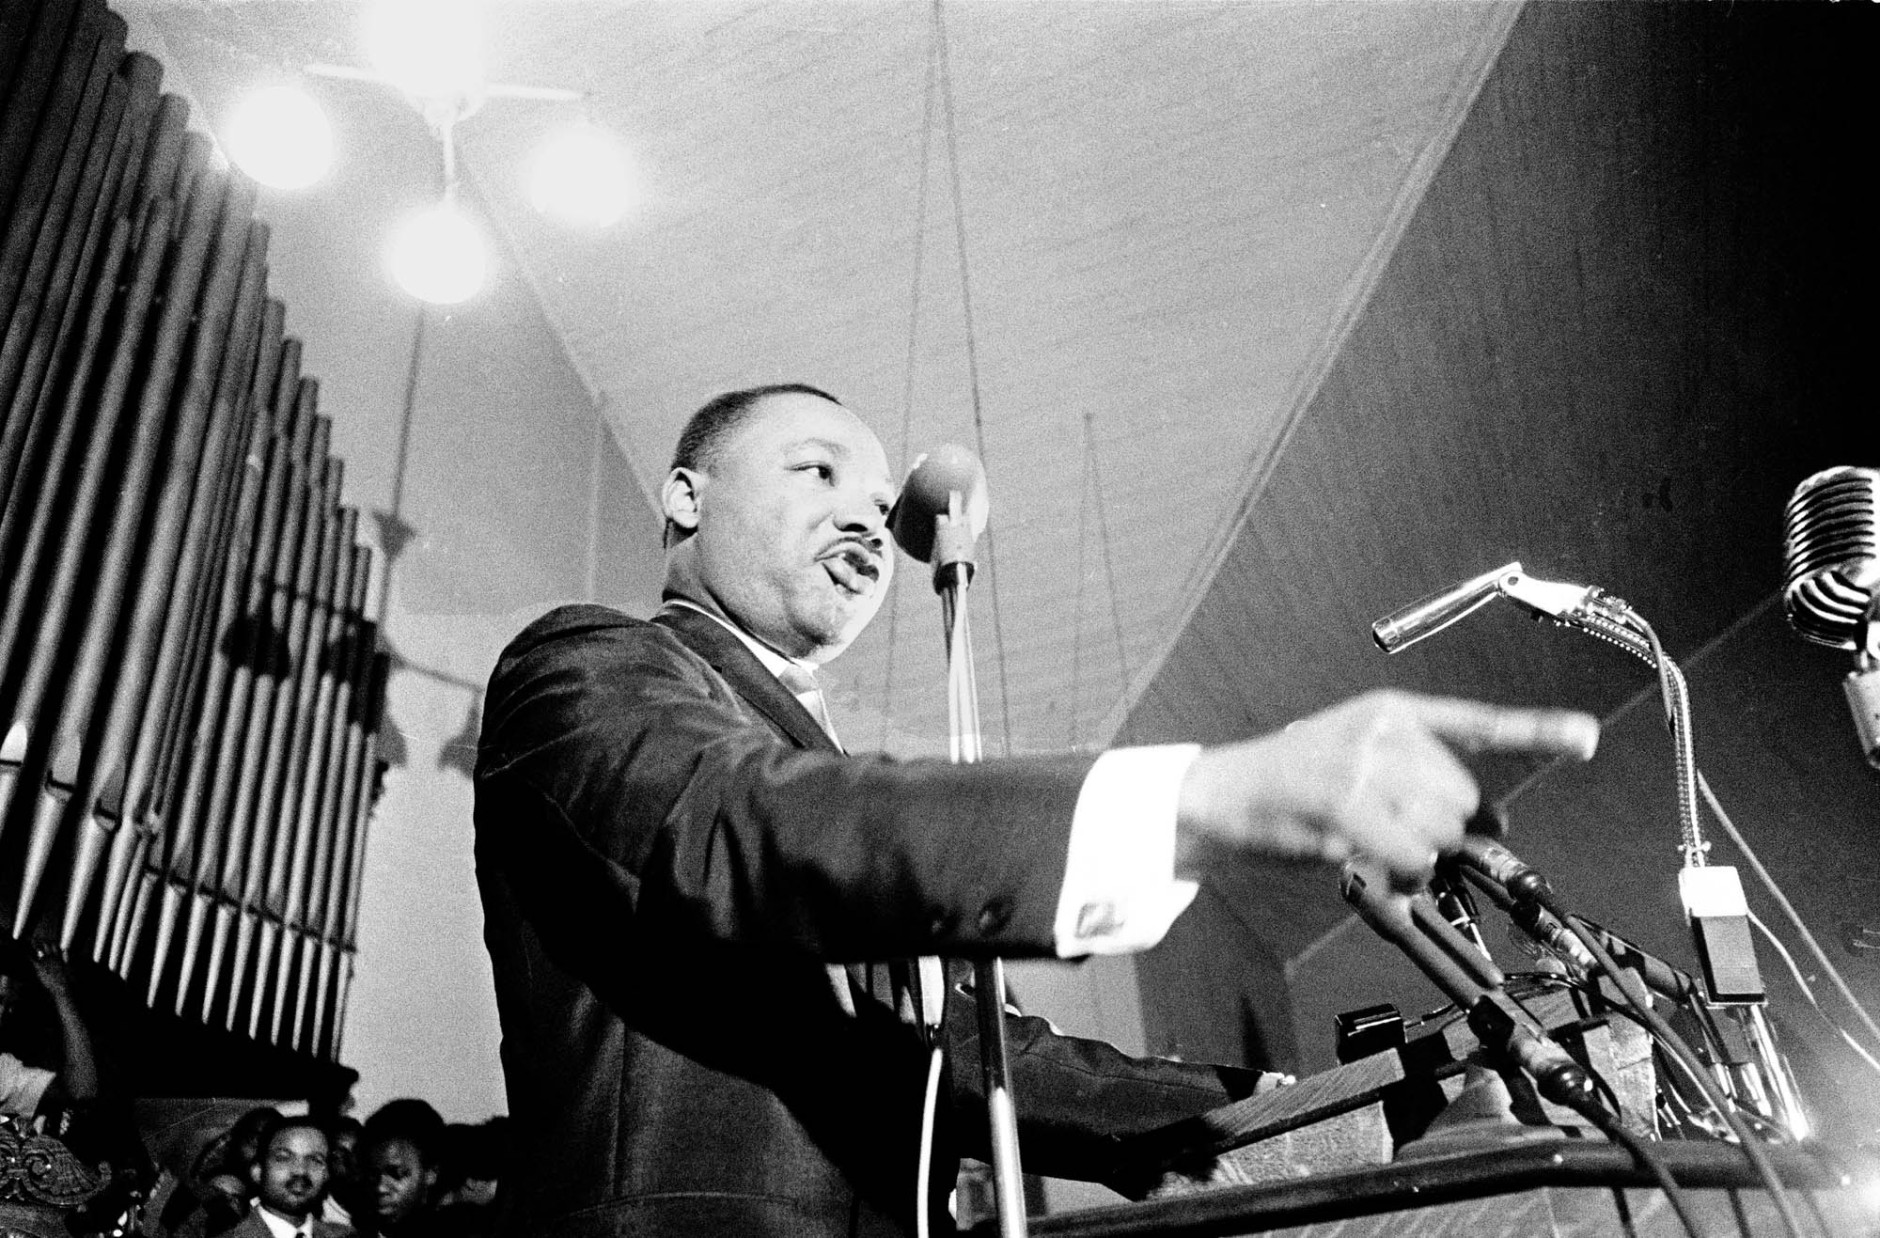 Martin Luther King Jr., speaks at a Selma, Ala., church in this January 1965 photo. A never-before-published speech given by King in Selma during a 1965 visit is included in "Ripples of Hope,"  a collection of 110 speeches from the 1780s to the 1990s, on topics from women's suffrage to gay rights. (AP Photo)